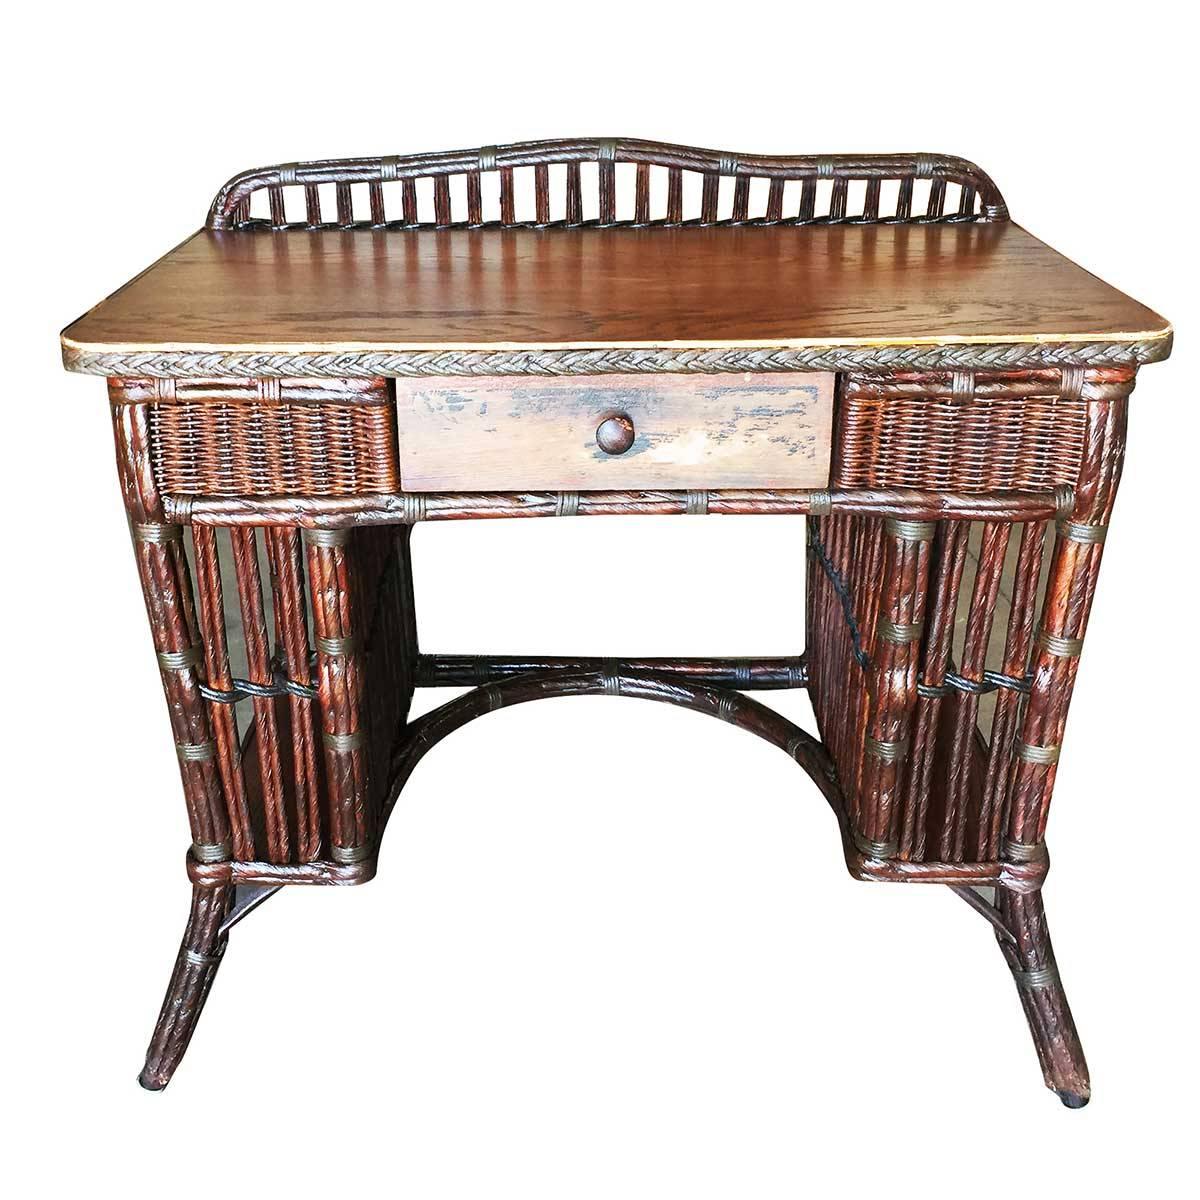 Rare dark stain finished stick rattan desk with a mahogany top. This late Victorian desk has an attached single center drawer for storage and single tier side shelf on each side for further storage. 

Restored to new for you.

All rattan, bamboo and